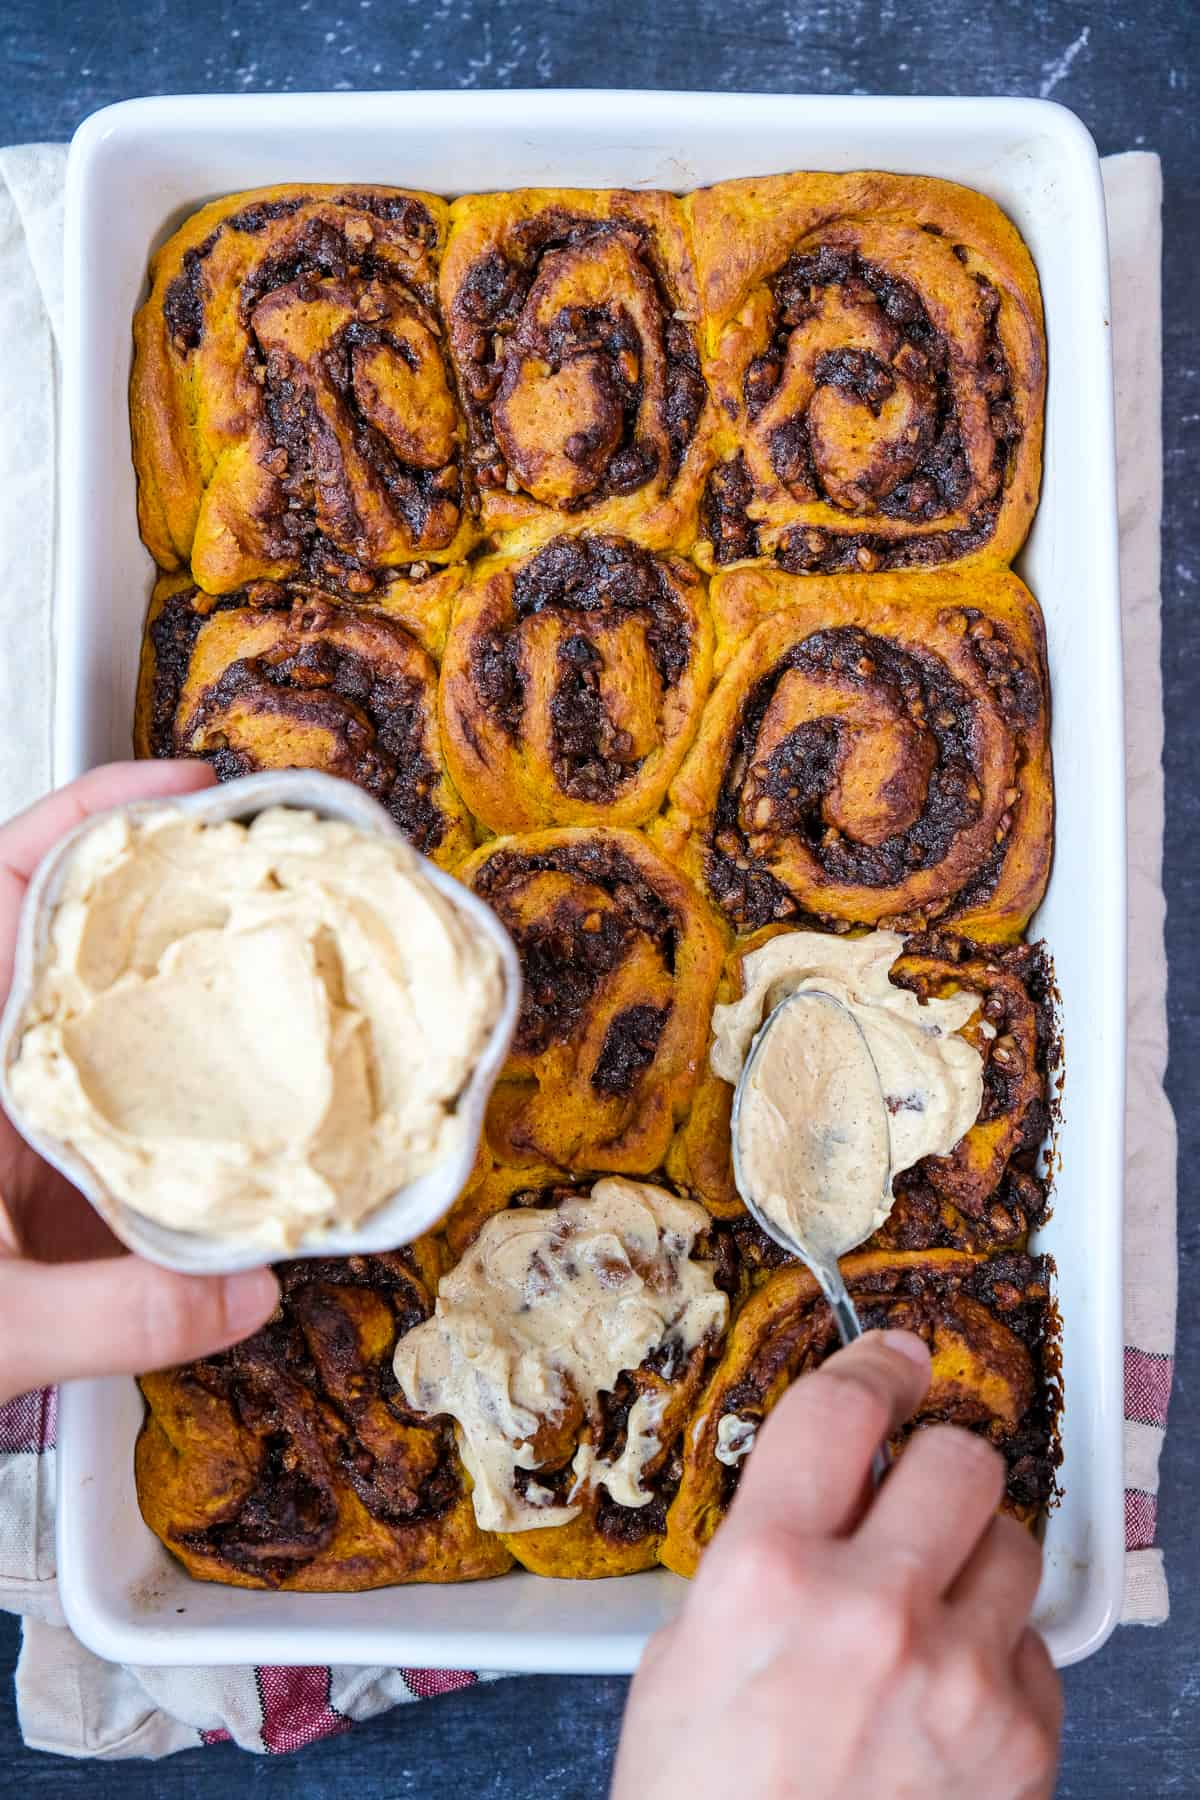 Hands spreading spiced vanilla frosting on baked cinnamon rolls in a baking pan.